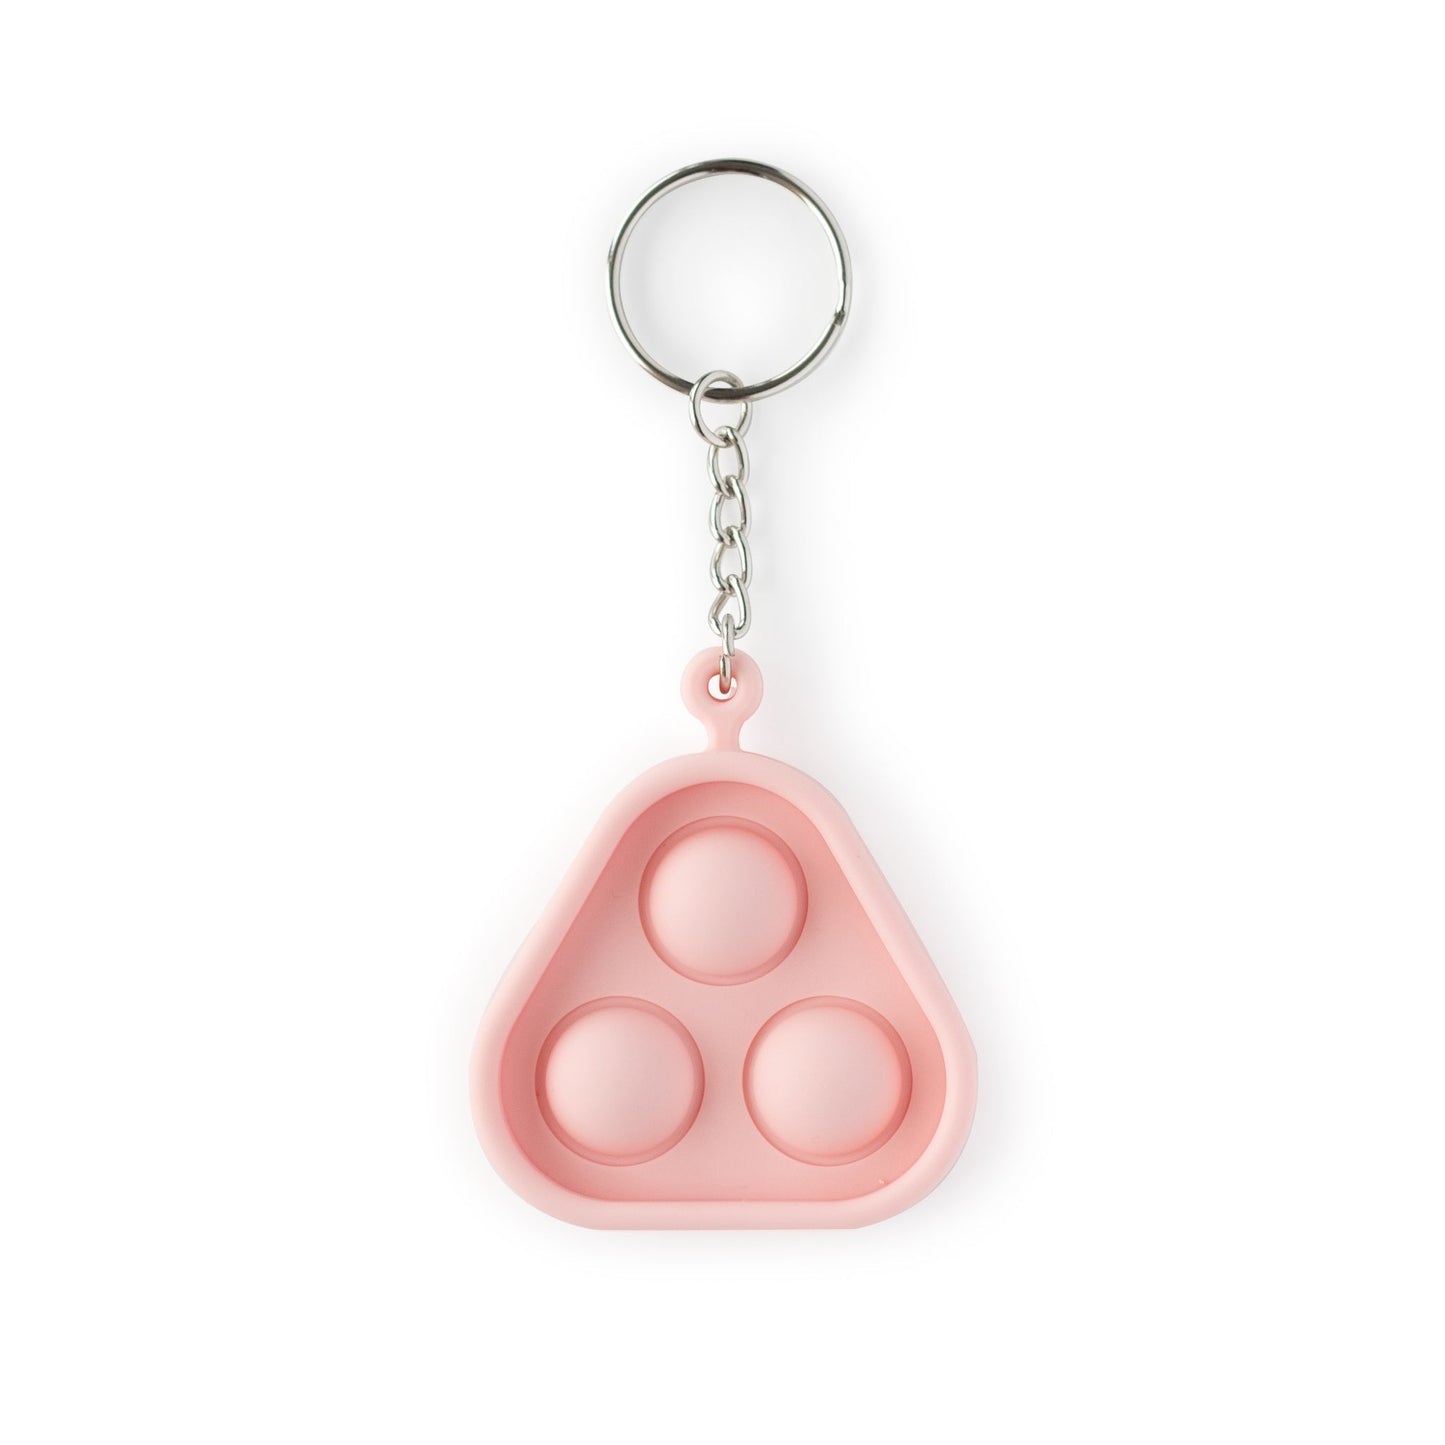 Accessories Bubble-Popper Keychain Soft Pink from Cara & Co Craft Supply